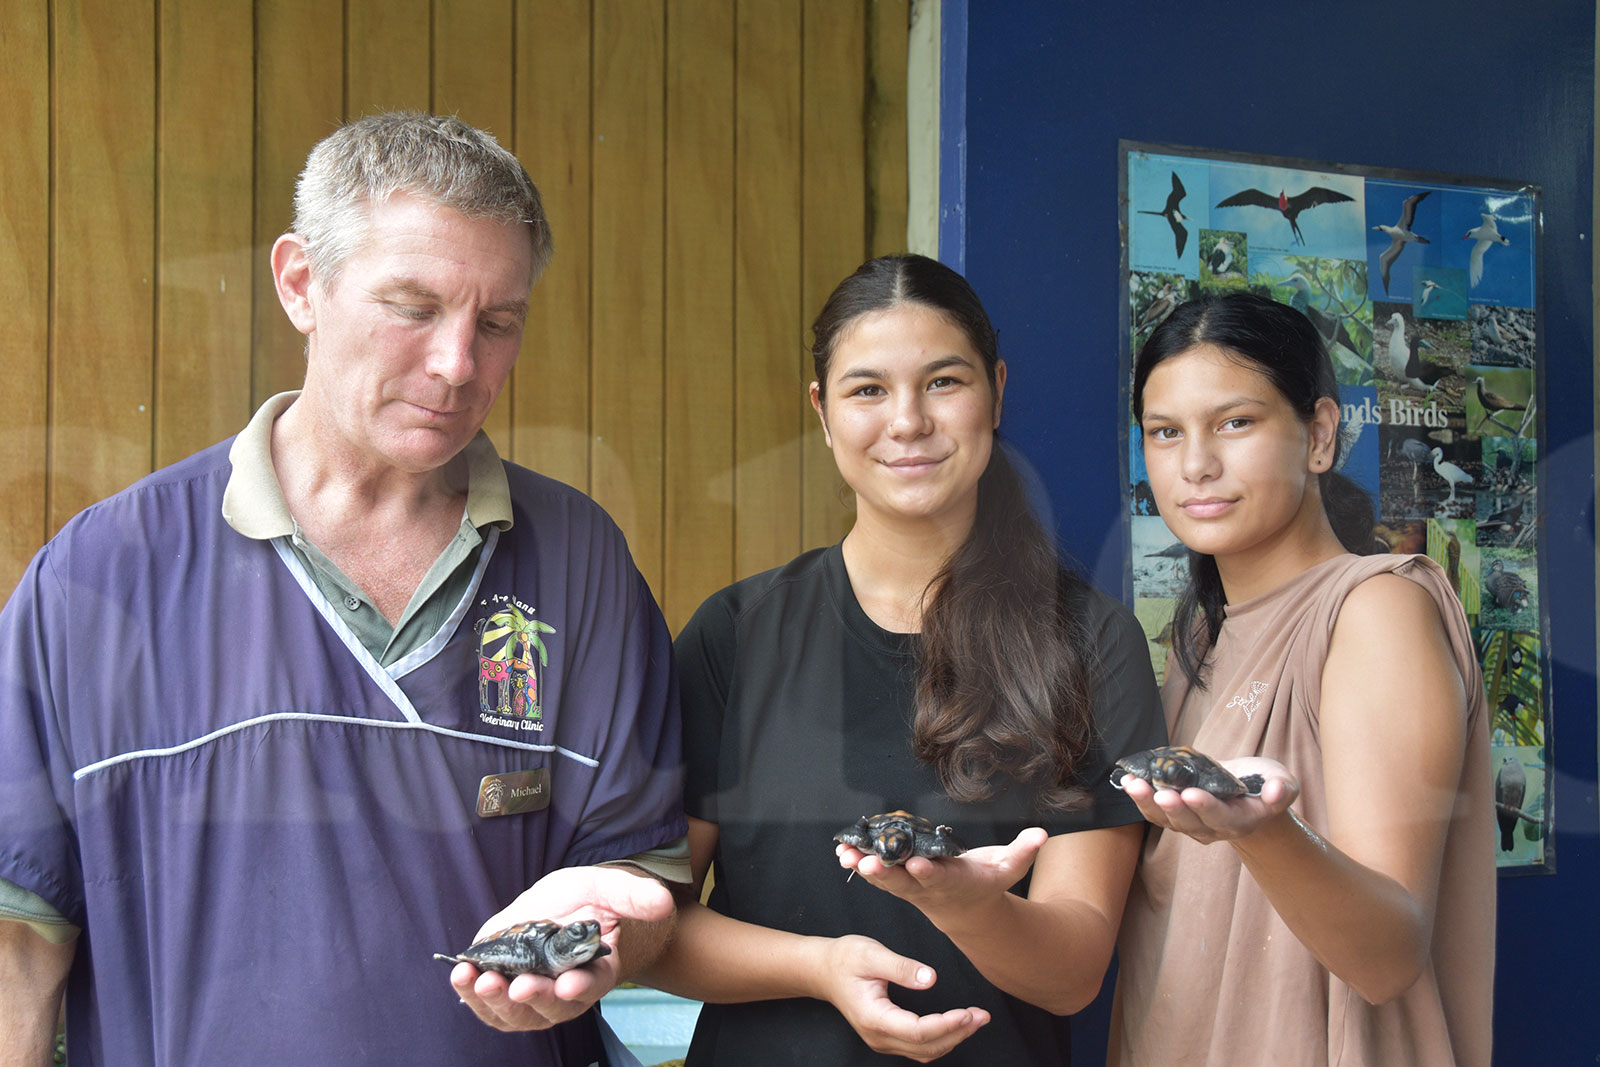 Turtles are not pet material, says Te Are Manu Vet Clinic head